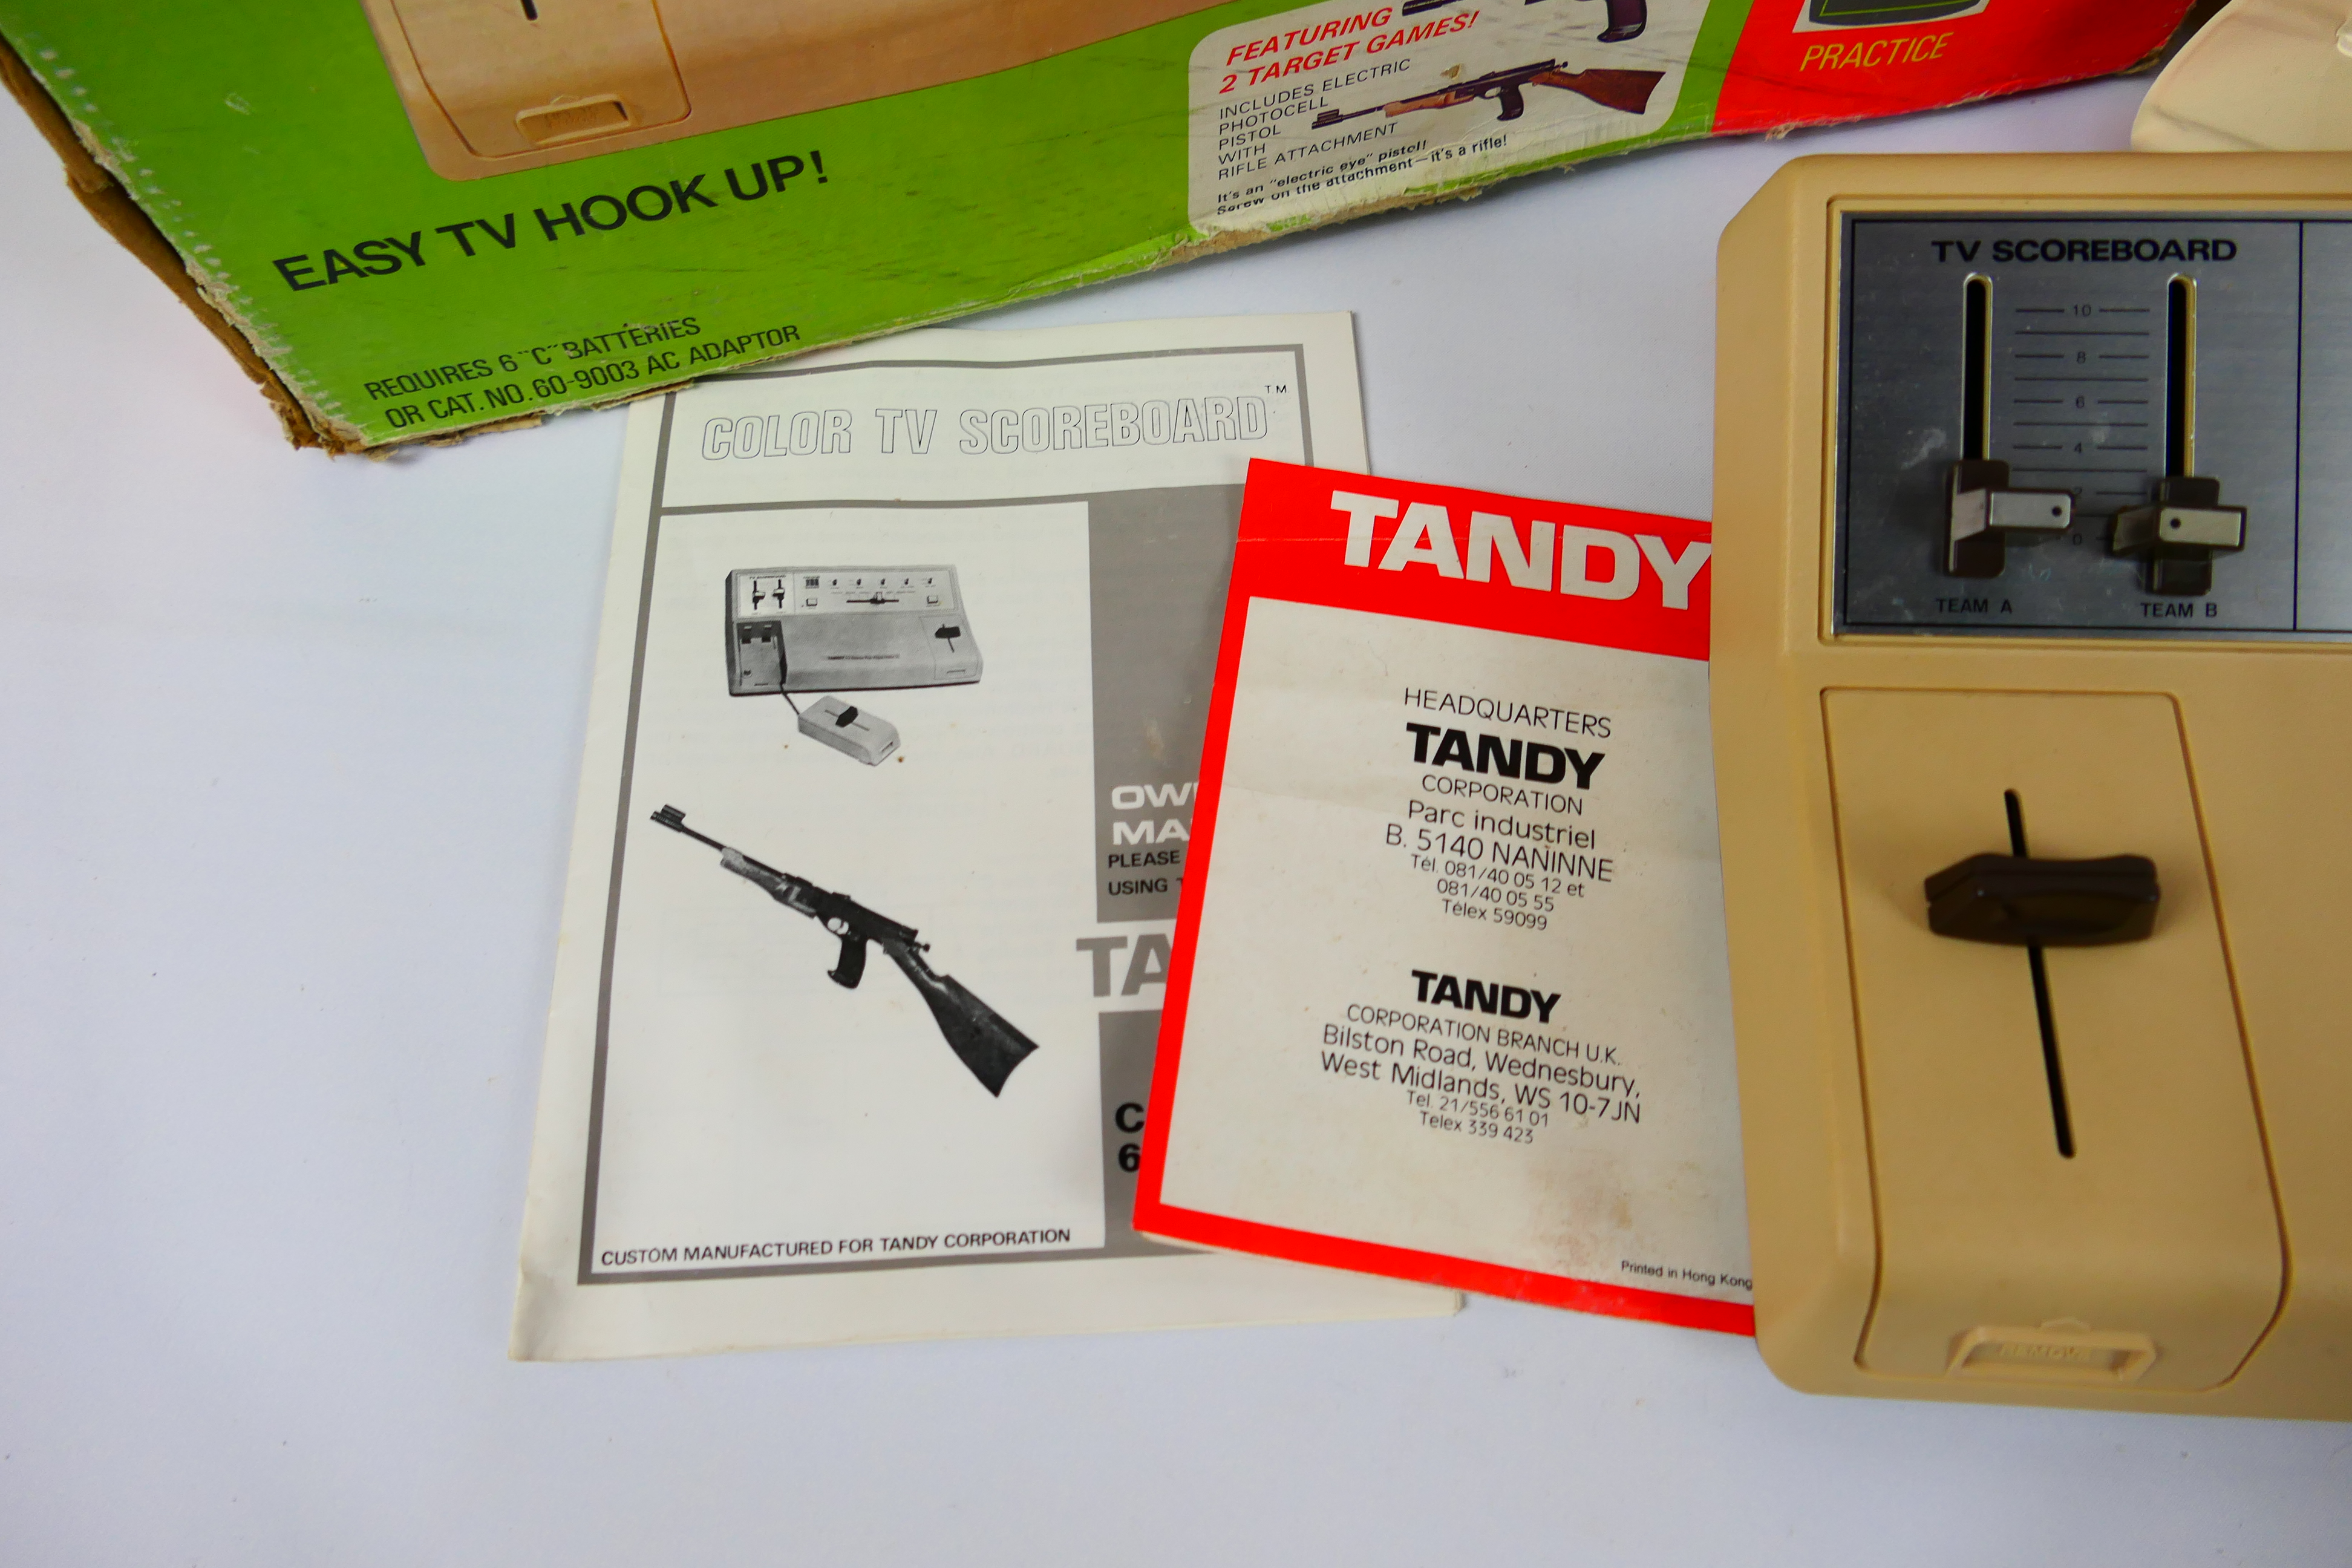 Tandy - A vintage Electronic Full Colour Pistol/Rifle game - Comes with pistol and rifle attachment. - Image 5 of 5